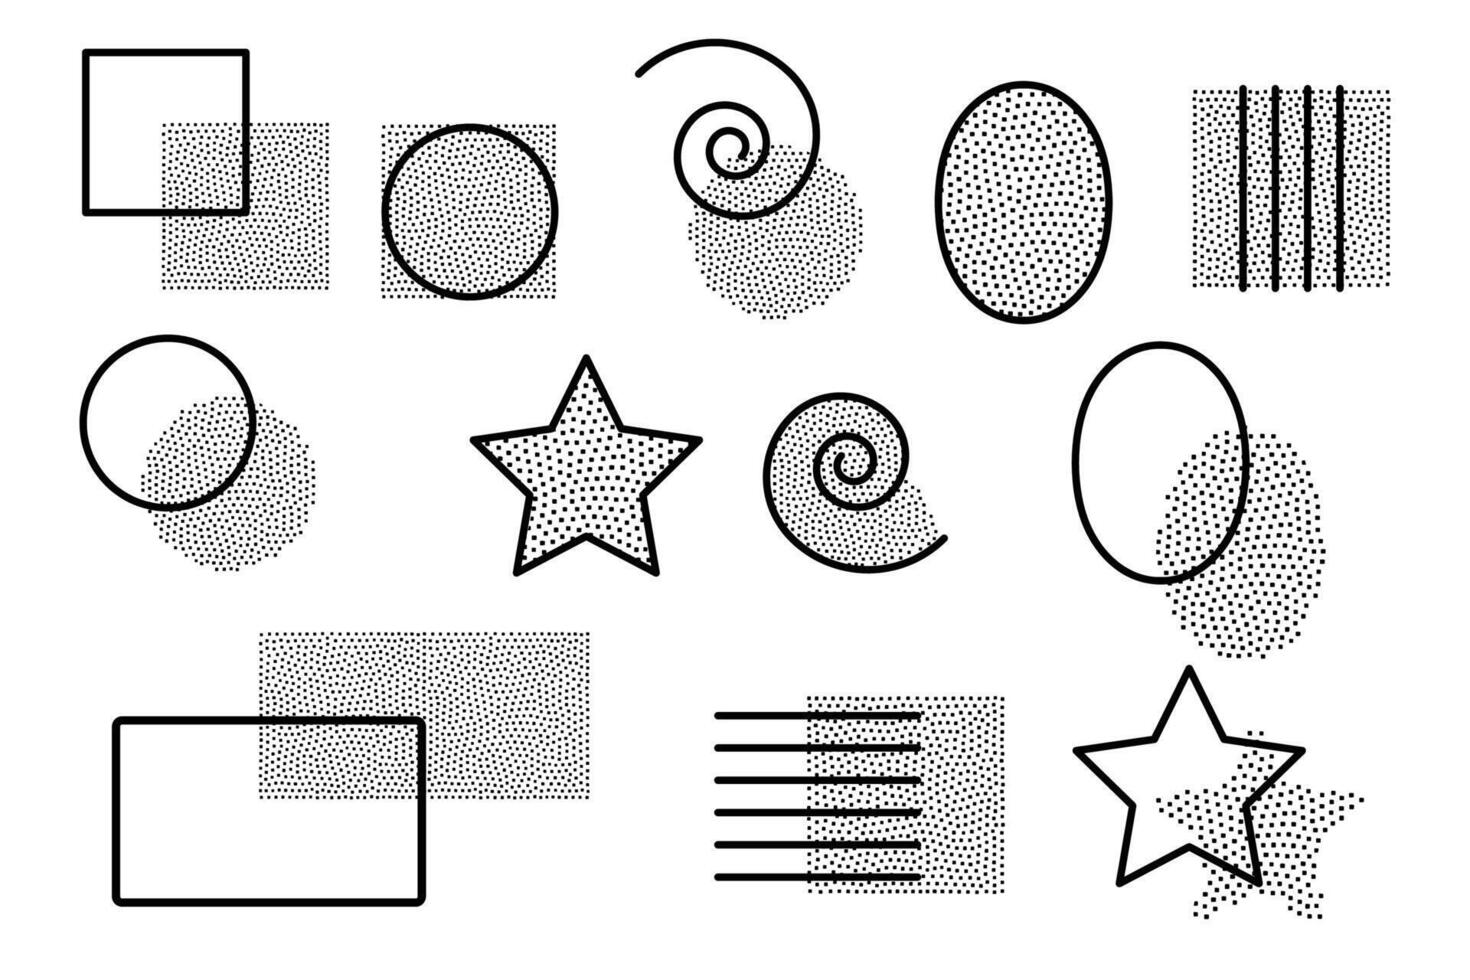 geometrical shapes with dots, backgrounds, title, star, spiral, square, oval, rectangle. Figures for your design vector